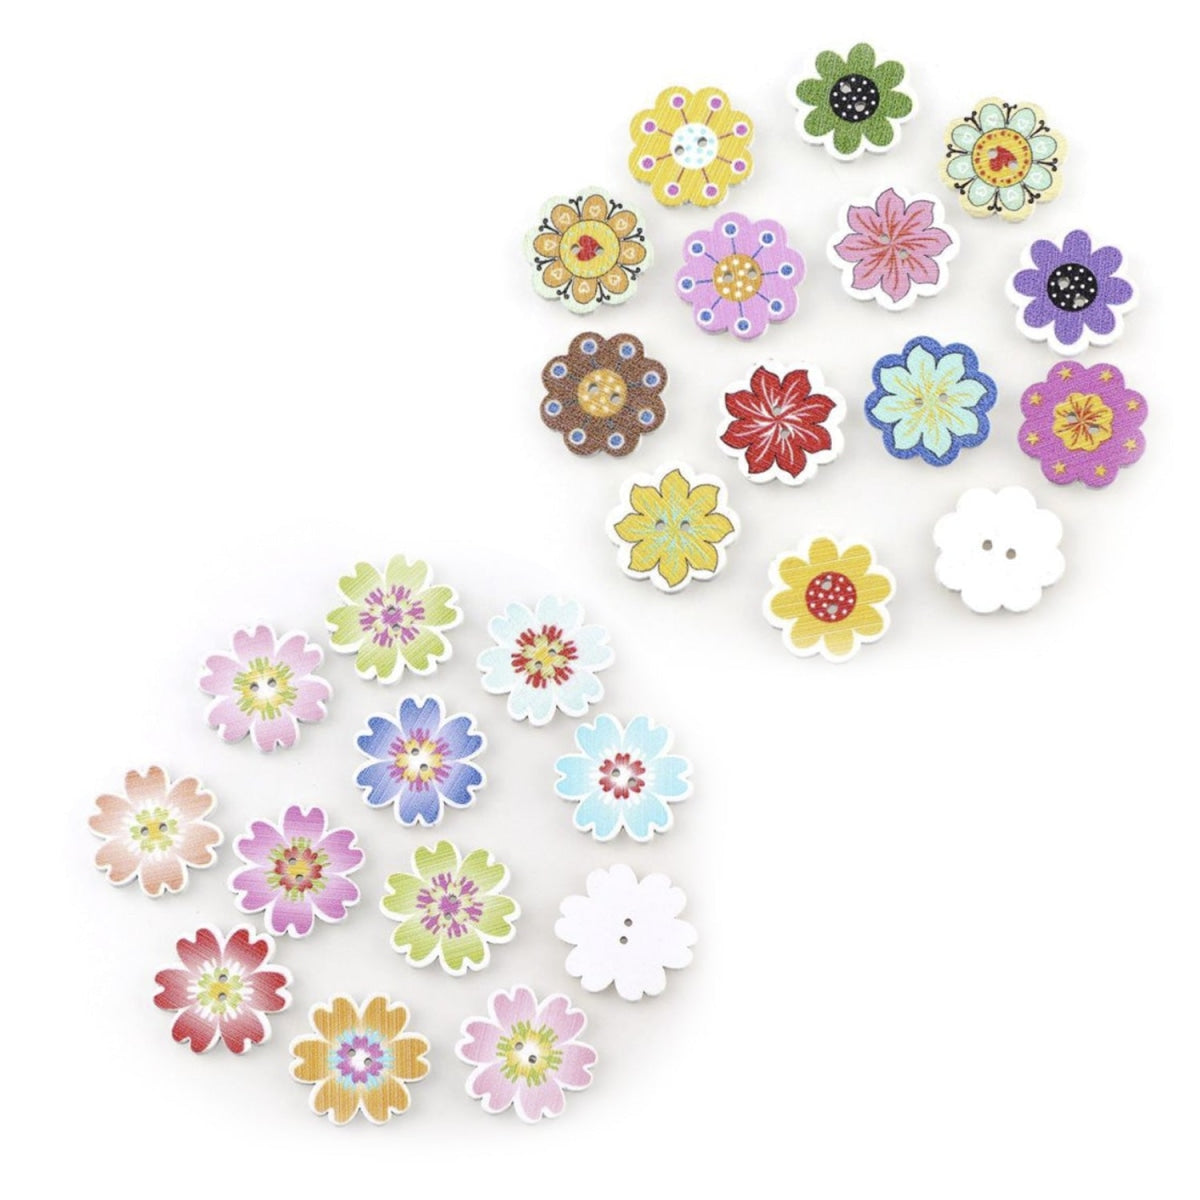 50X 20-25Mm White Wooden Buttons Colourful Flower Edge Shape Design Scrapbook Sewing Accessories Diy